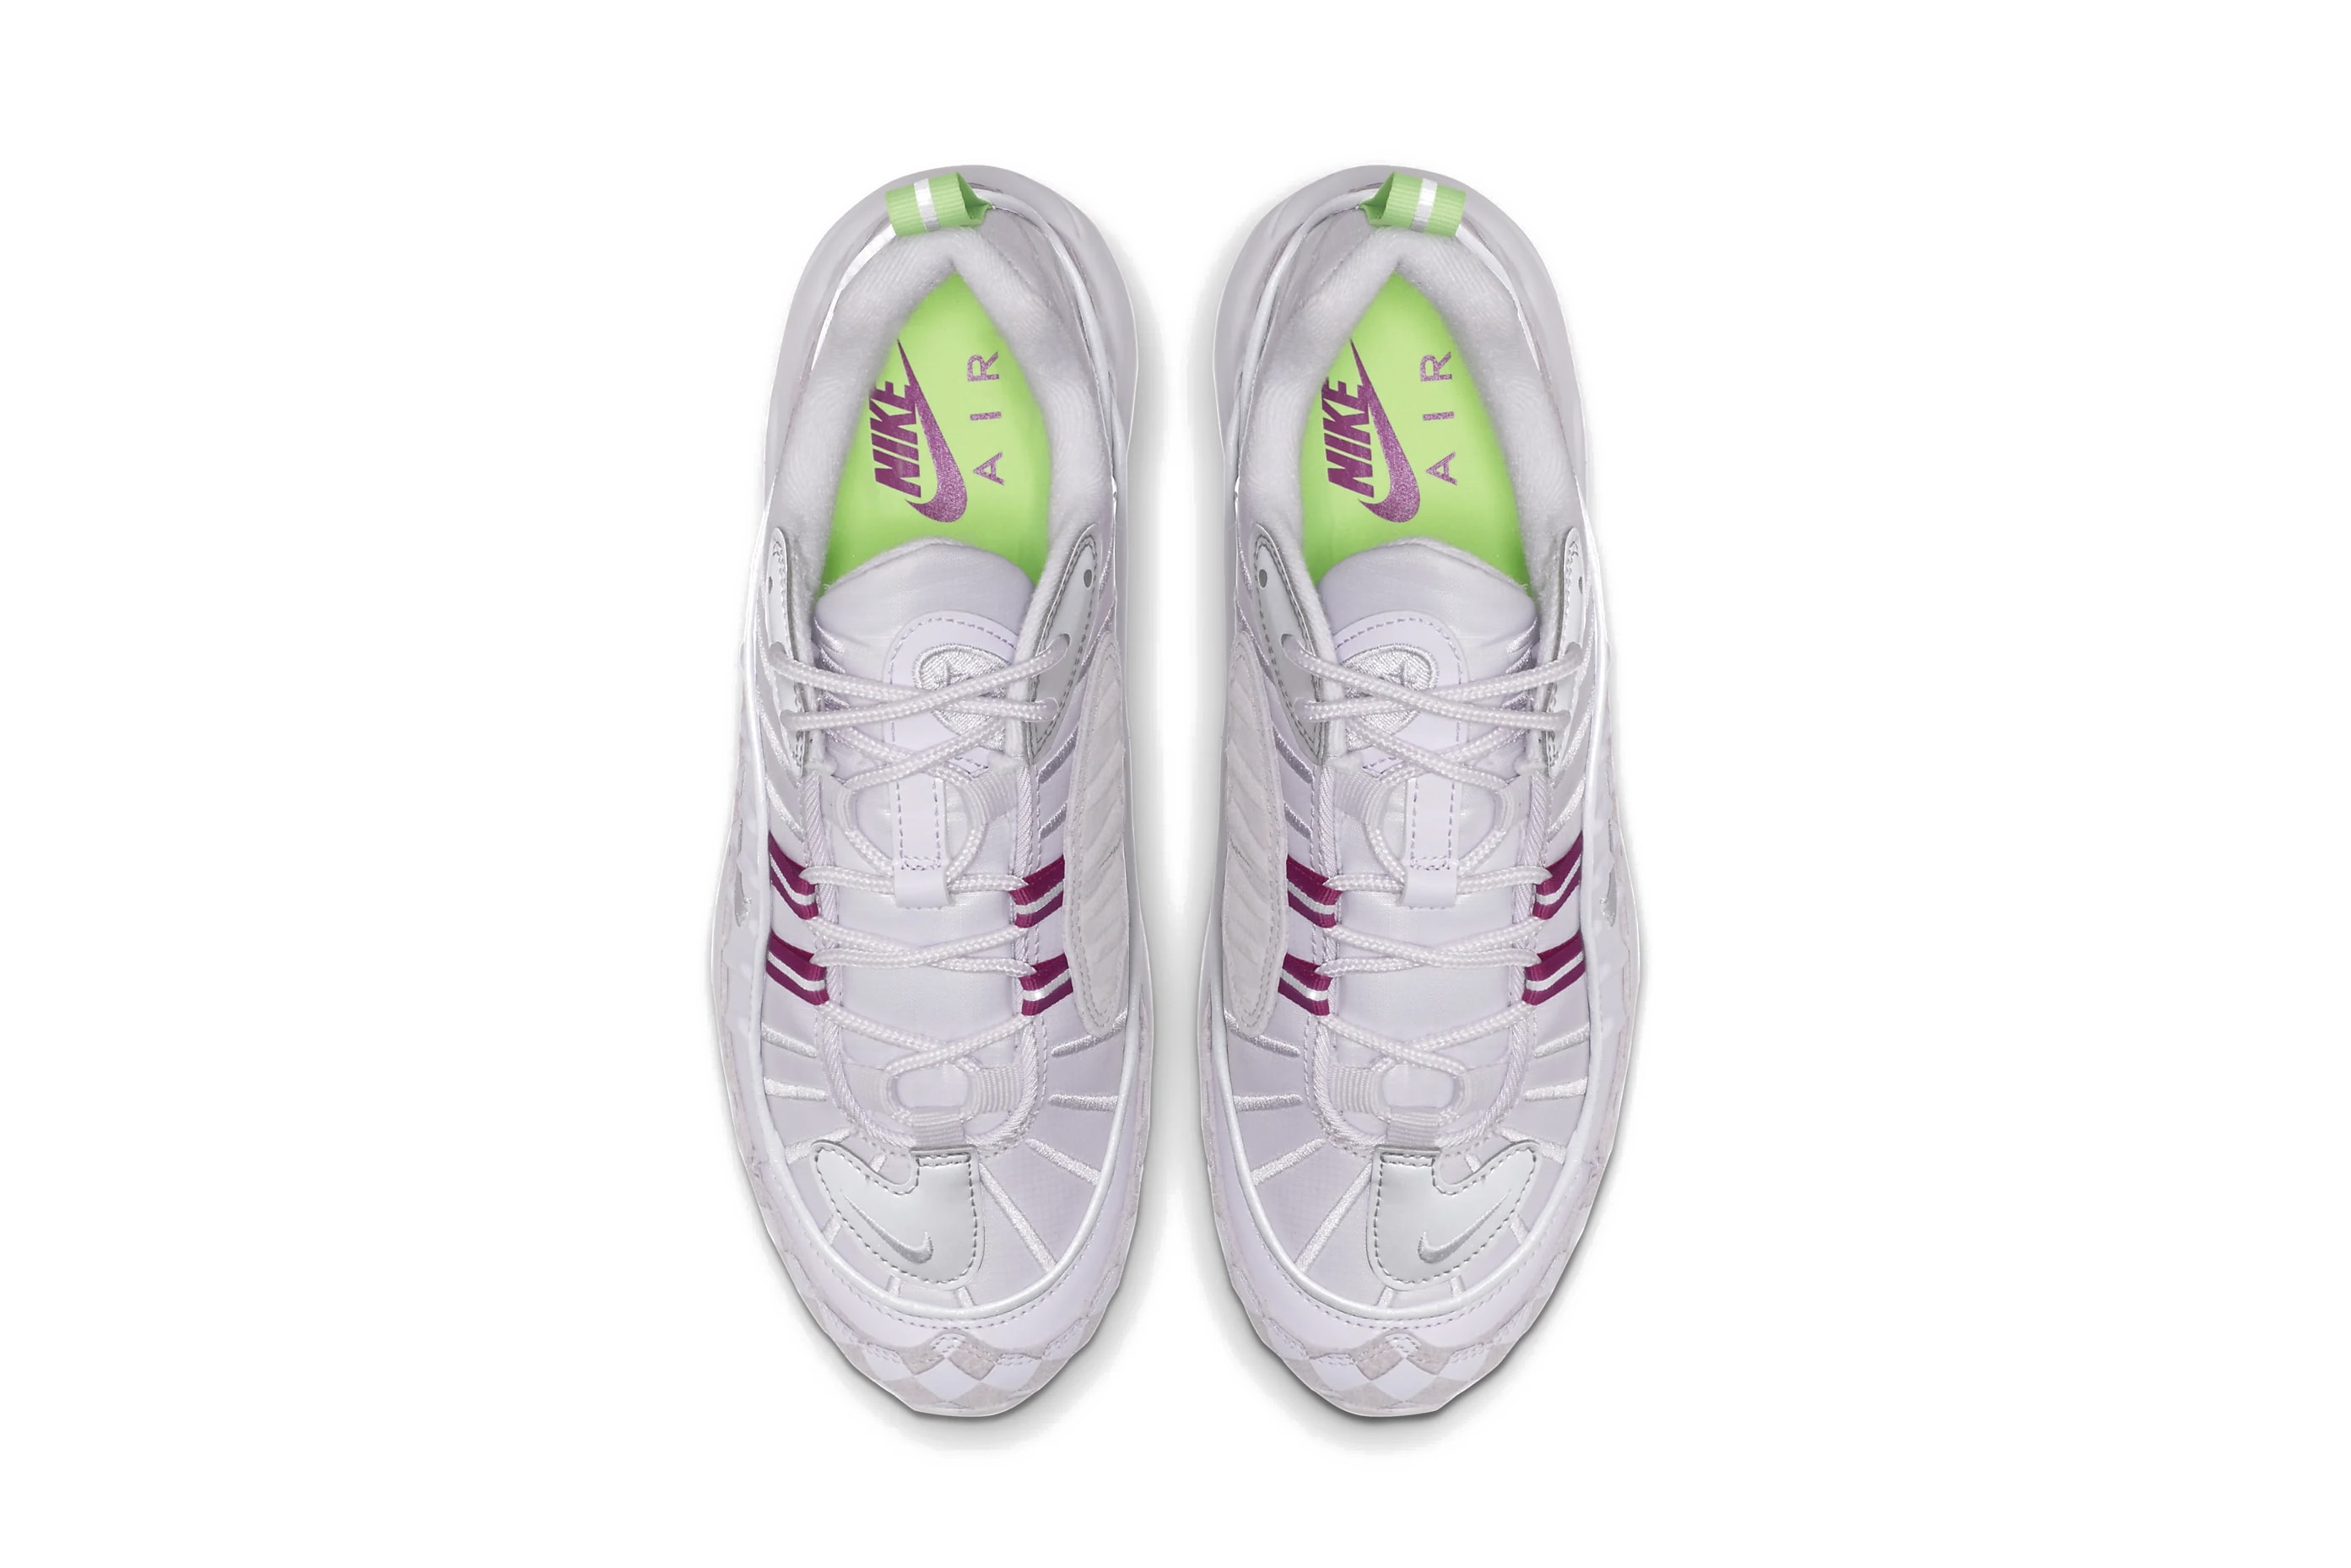 Nike Air Max 98 Pastel Pink Chequered Sneaker Pattern Neon Pink Green Sneaker Shoe Bubble Chunky Trainer Footwear 